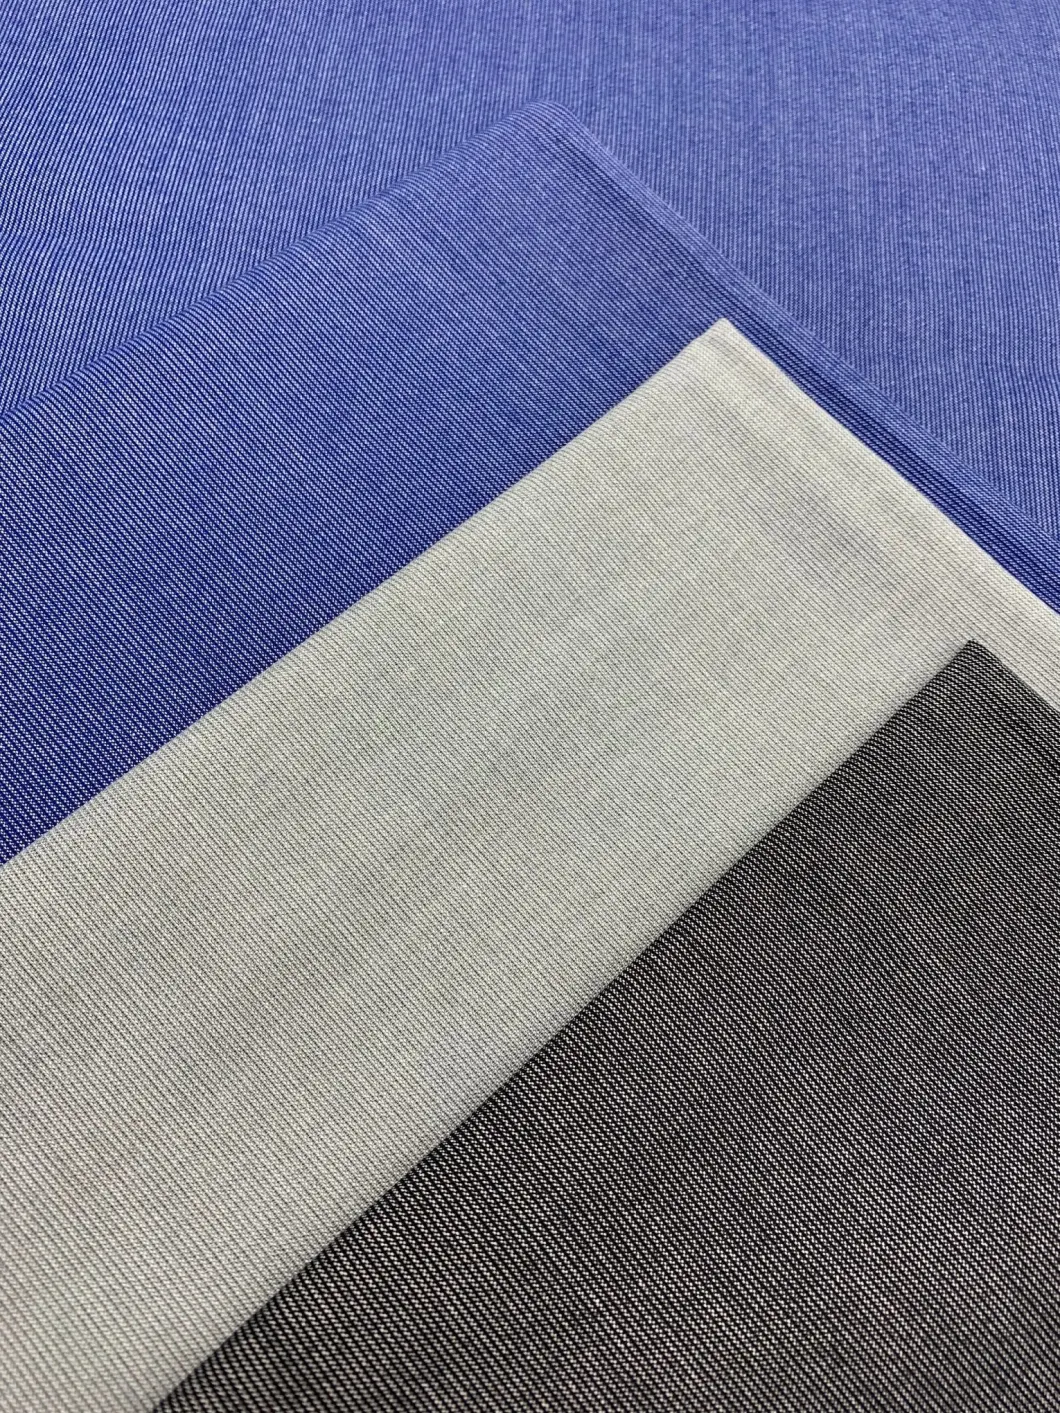 100% Polyester Water-Repellent PU Coated Twill Peach Skin Suit Fabric